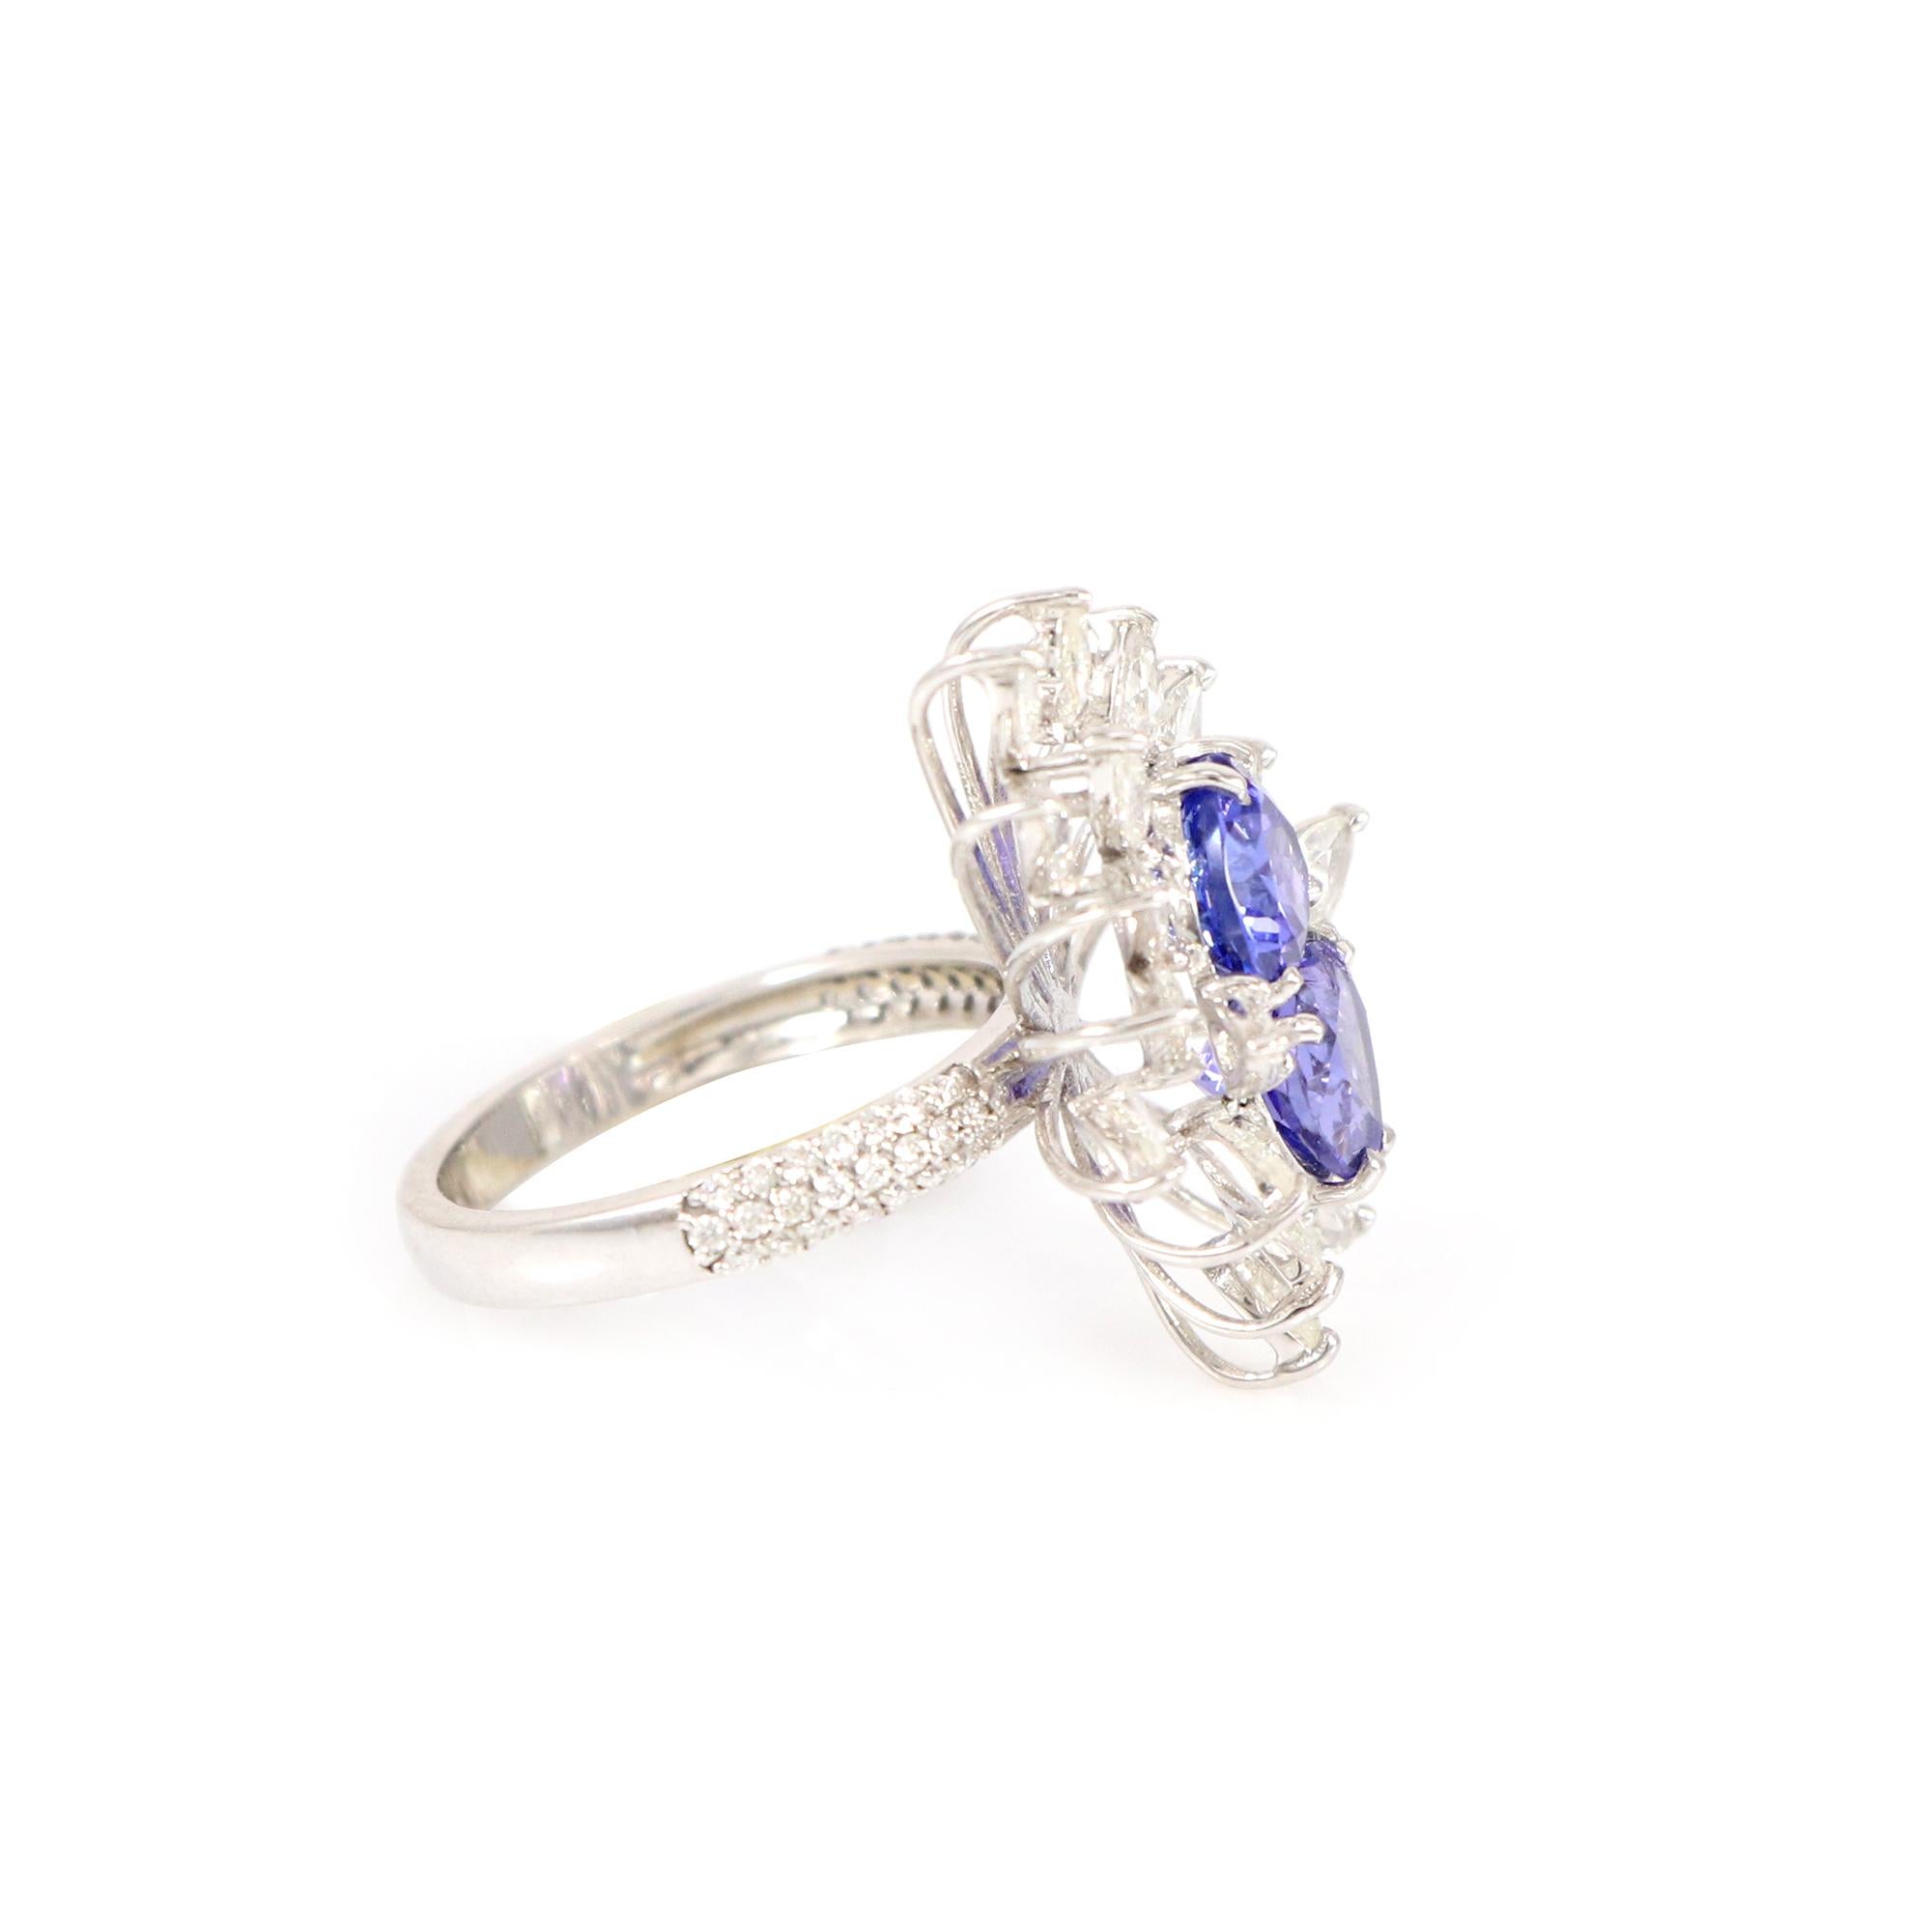 Discover our exquisite 18K white gold ring adorned with heart-shaped tanzanite and sparkling white diamonds. This piece embodies elegance and grace, blending the tanzanite's deep blue hue with the diamond's brilliance for luxury and sophistication.